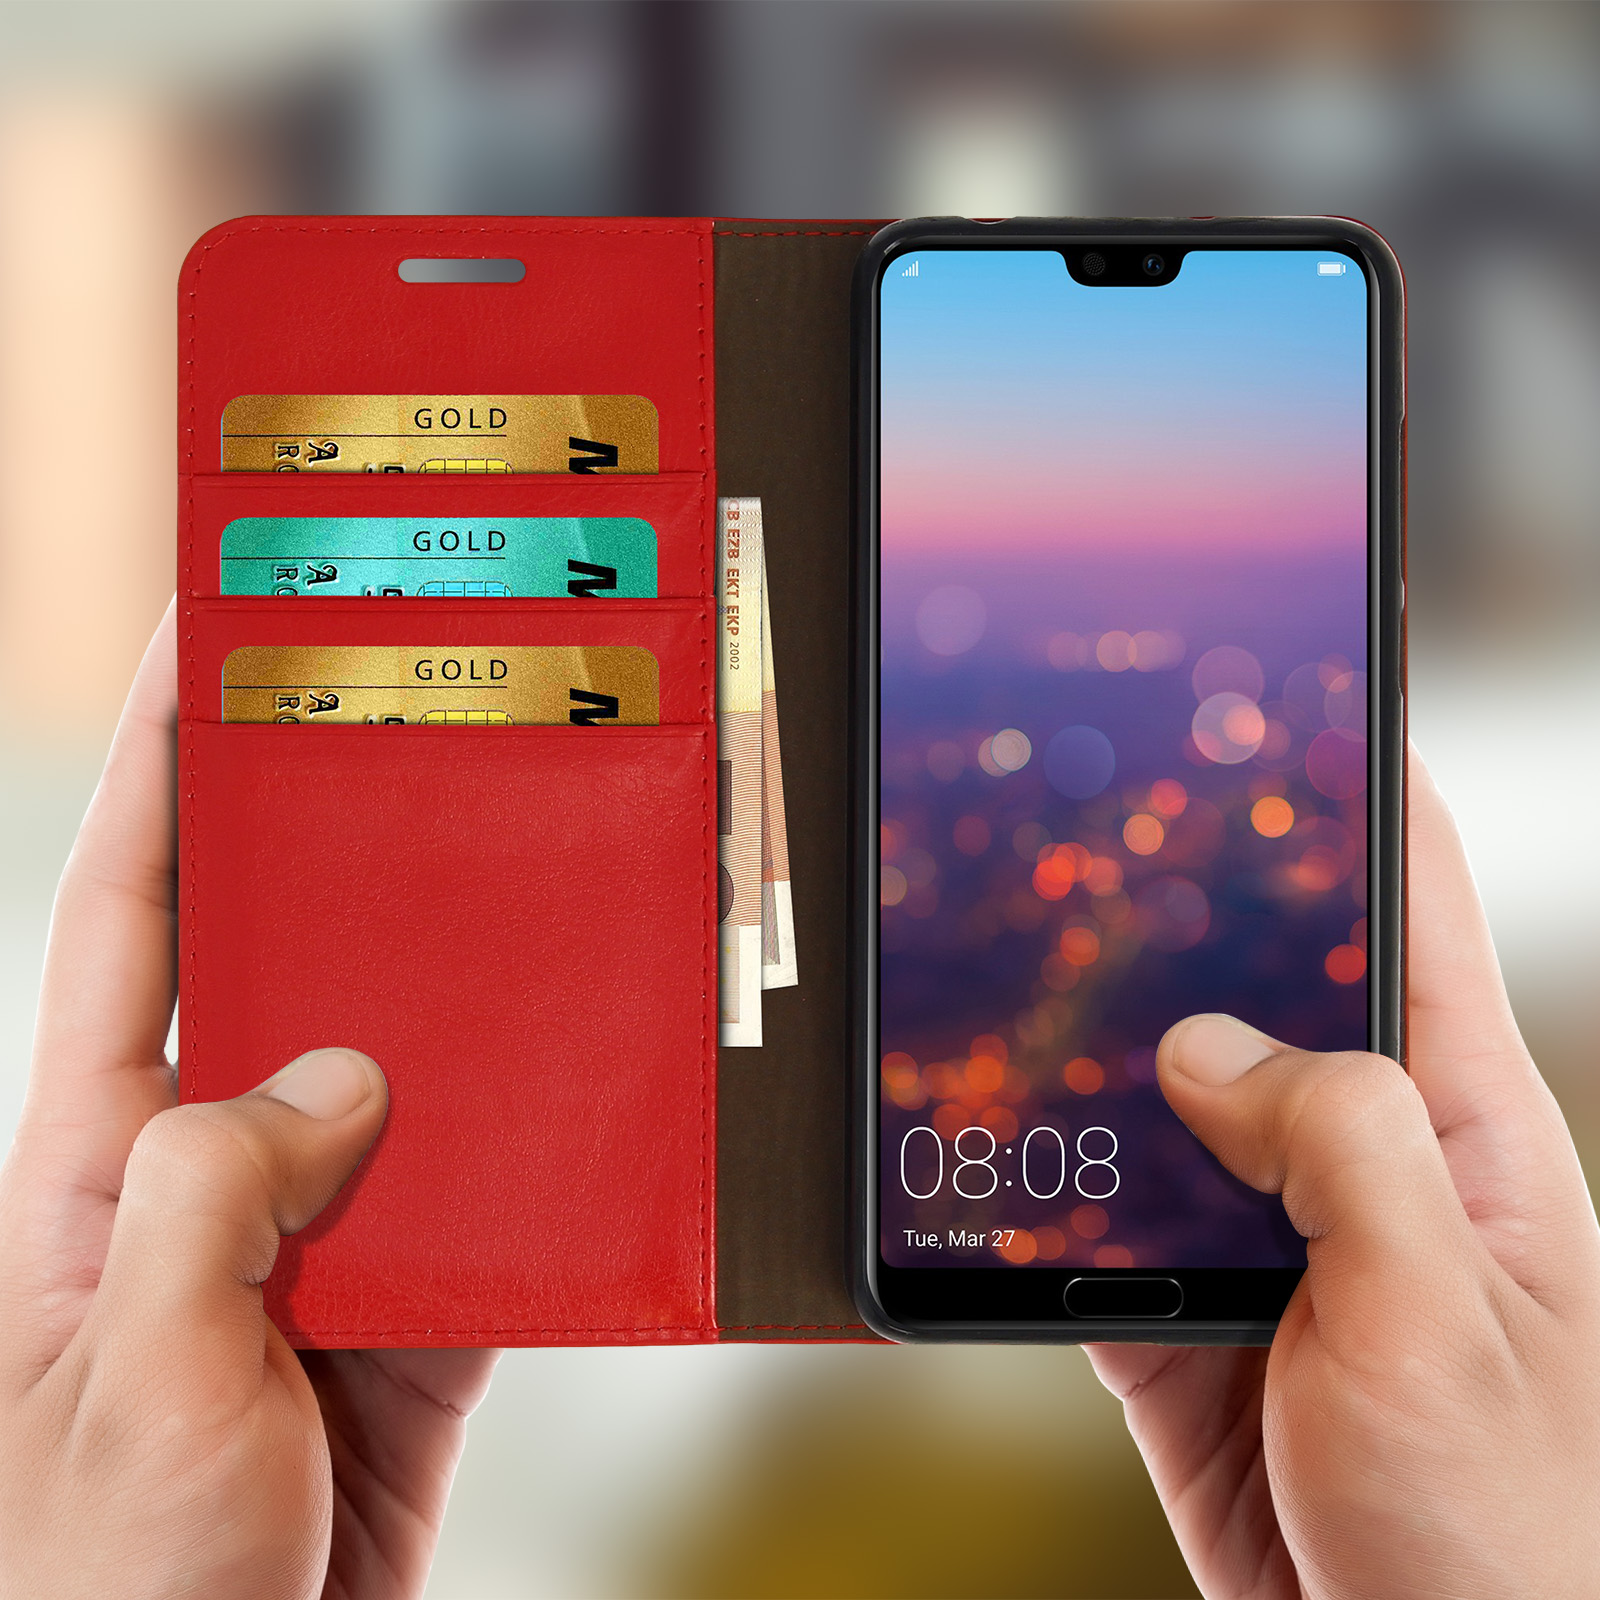 AVIZAR First Series, Huawei, P20 Bookcover, Pro, Rot